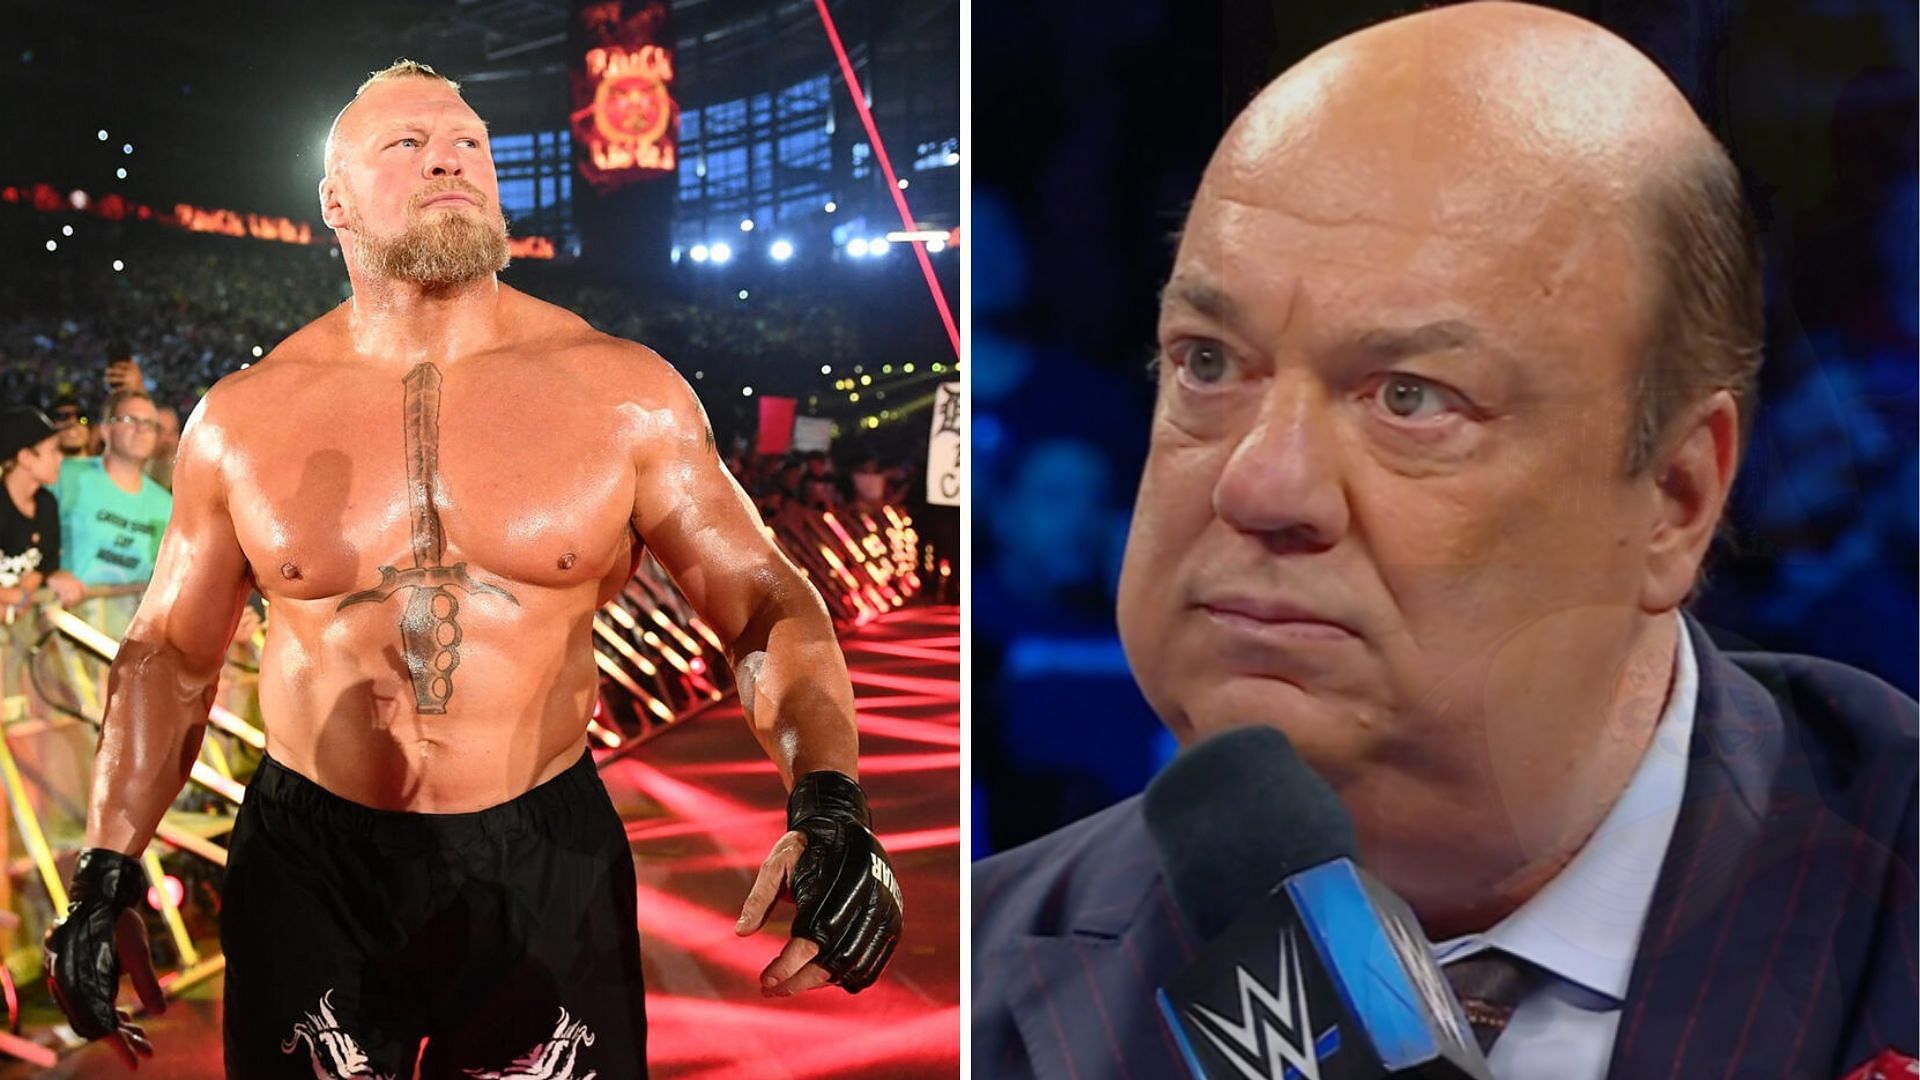 Brock Lesnar on the left and Paul Heyman on the right [Image credits: wwe.com and Heyman